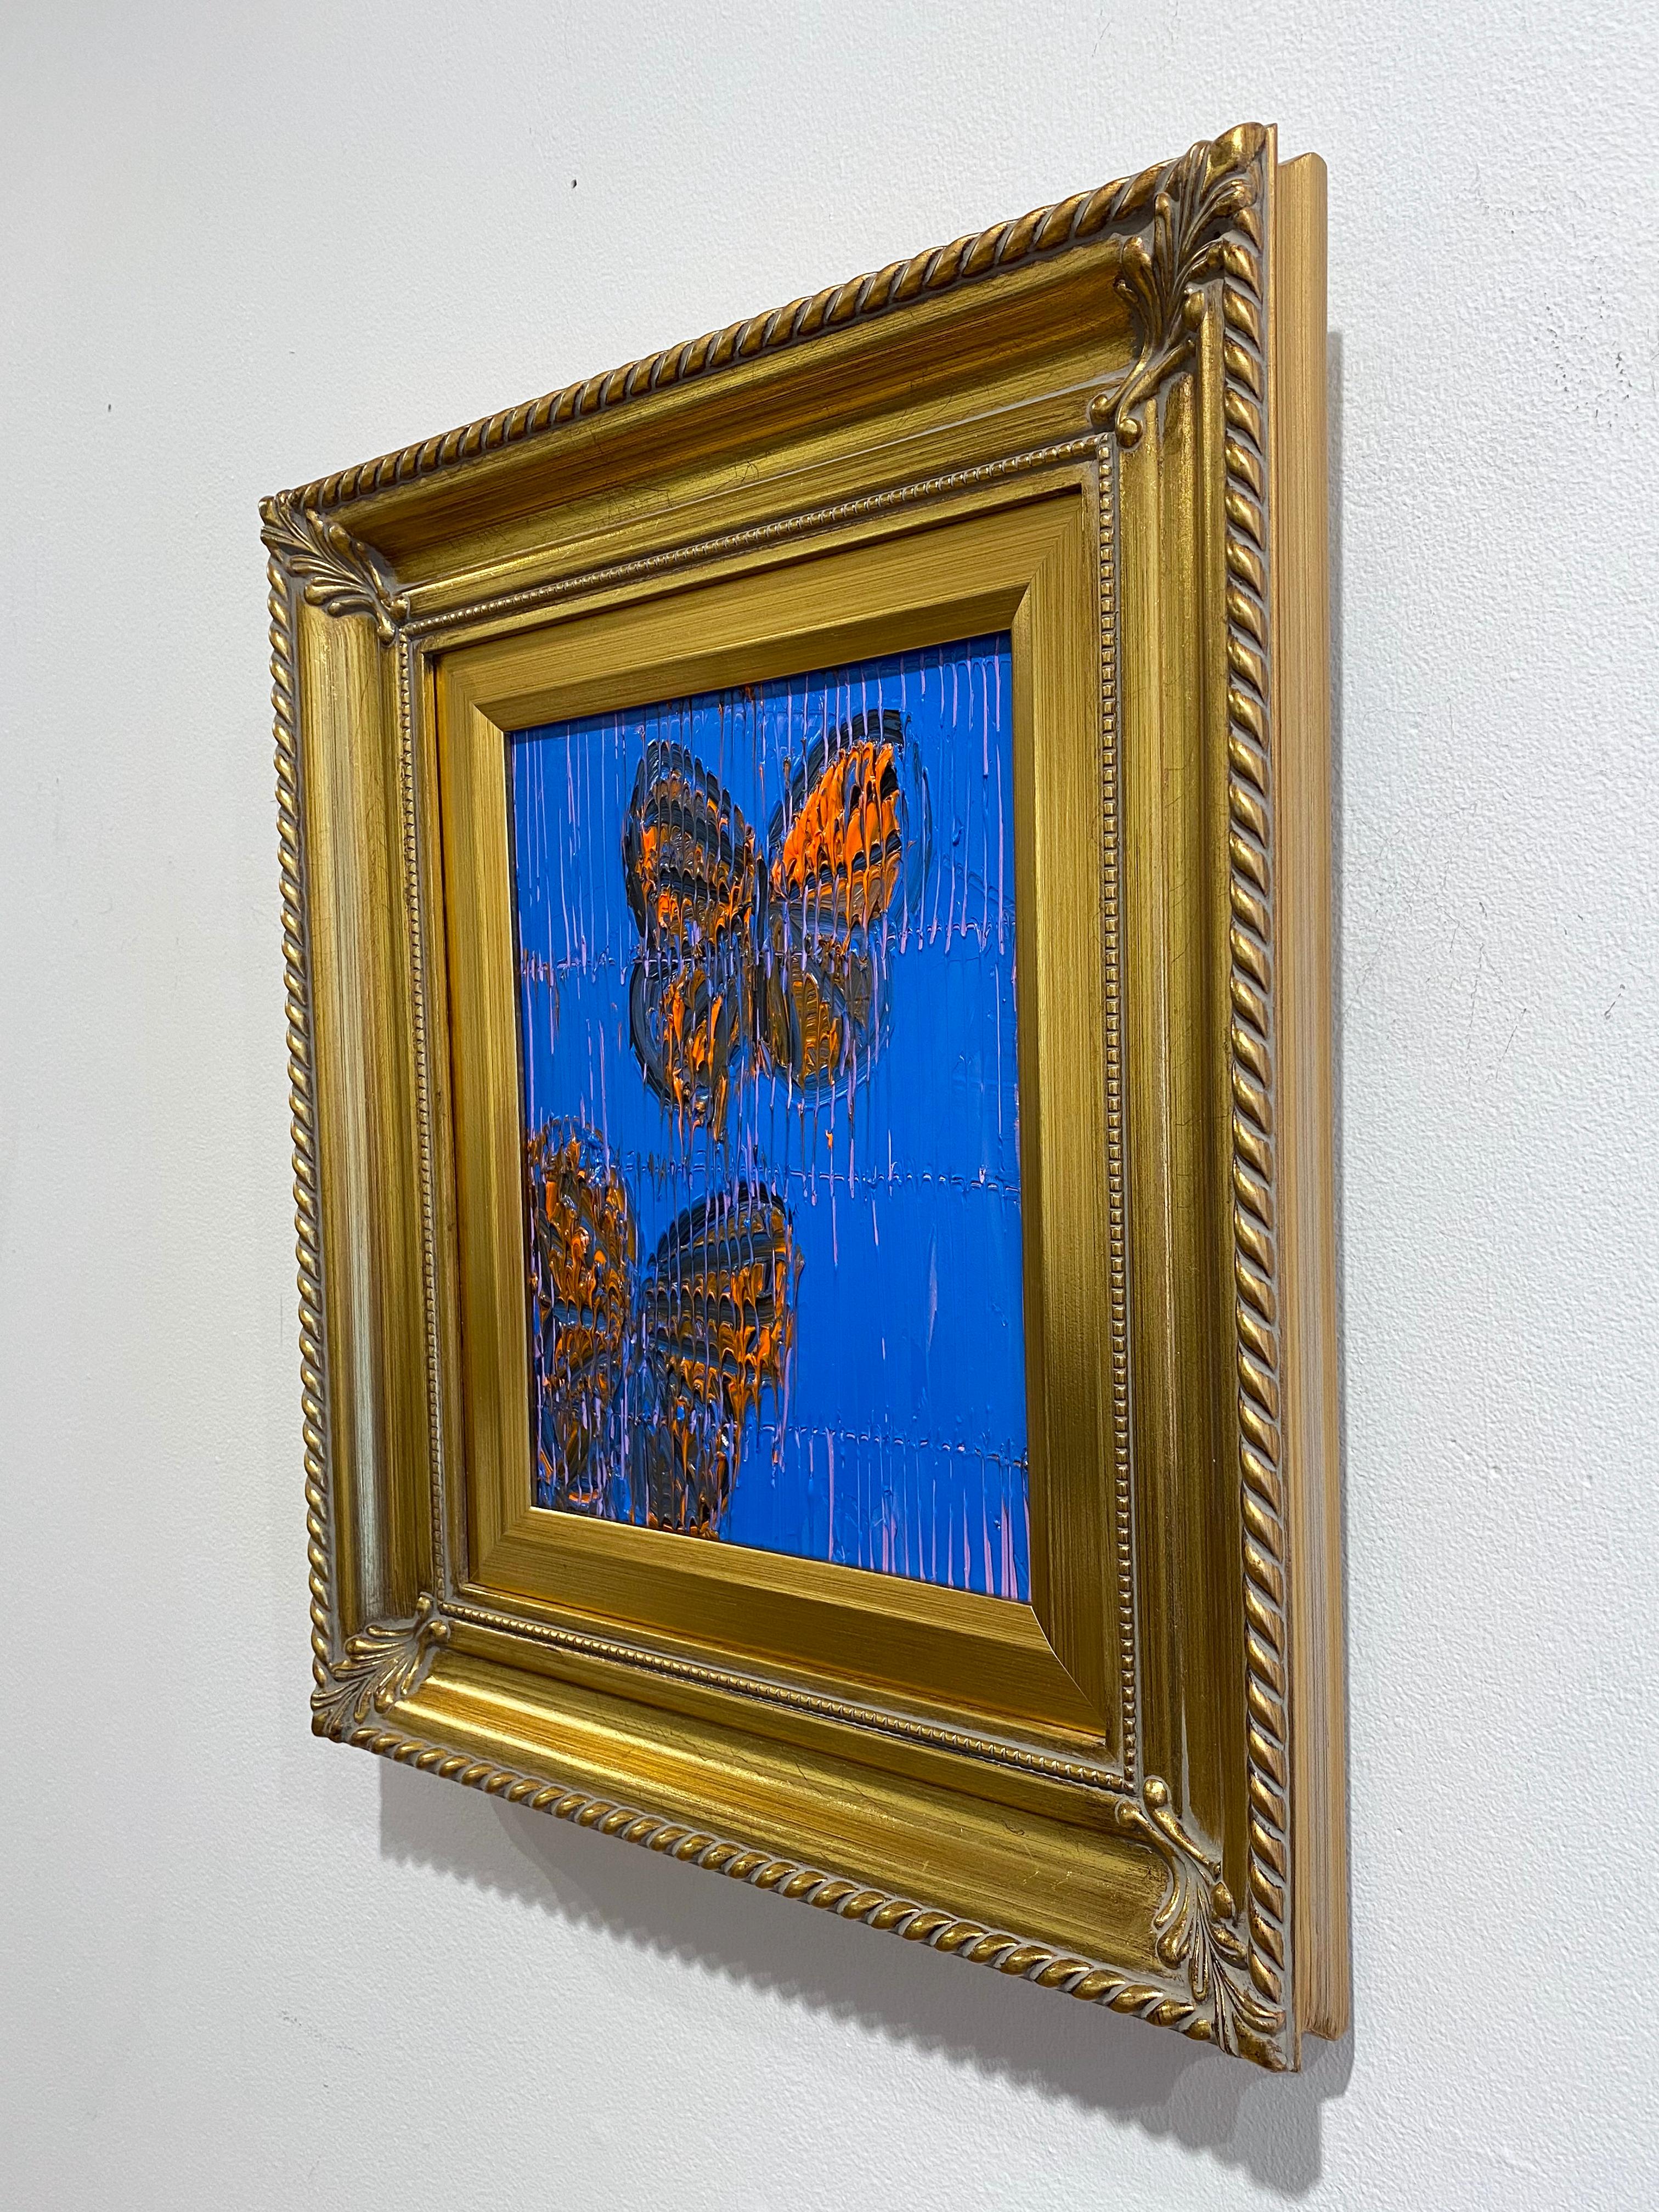 'Monarchs' by Hunt Slonem, 2020. Oil on wood, 10 x 8 in. Framed size is 16 x 14 in. This painting features a charming portrait of two Monarch butterflies. The butterflies are painted in orange and black on a deep blue background with a cross-hatch